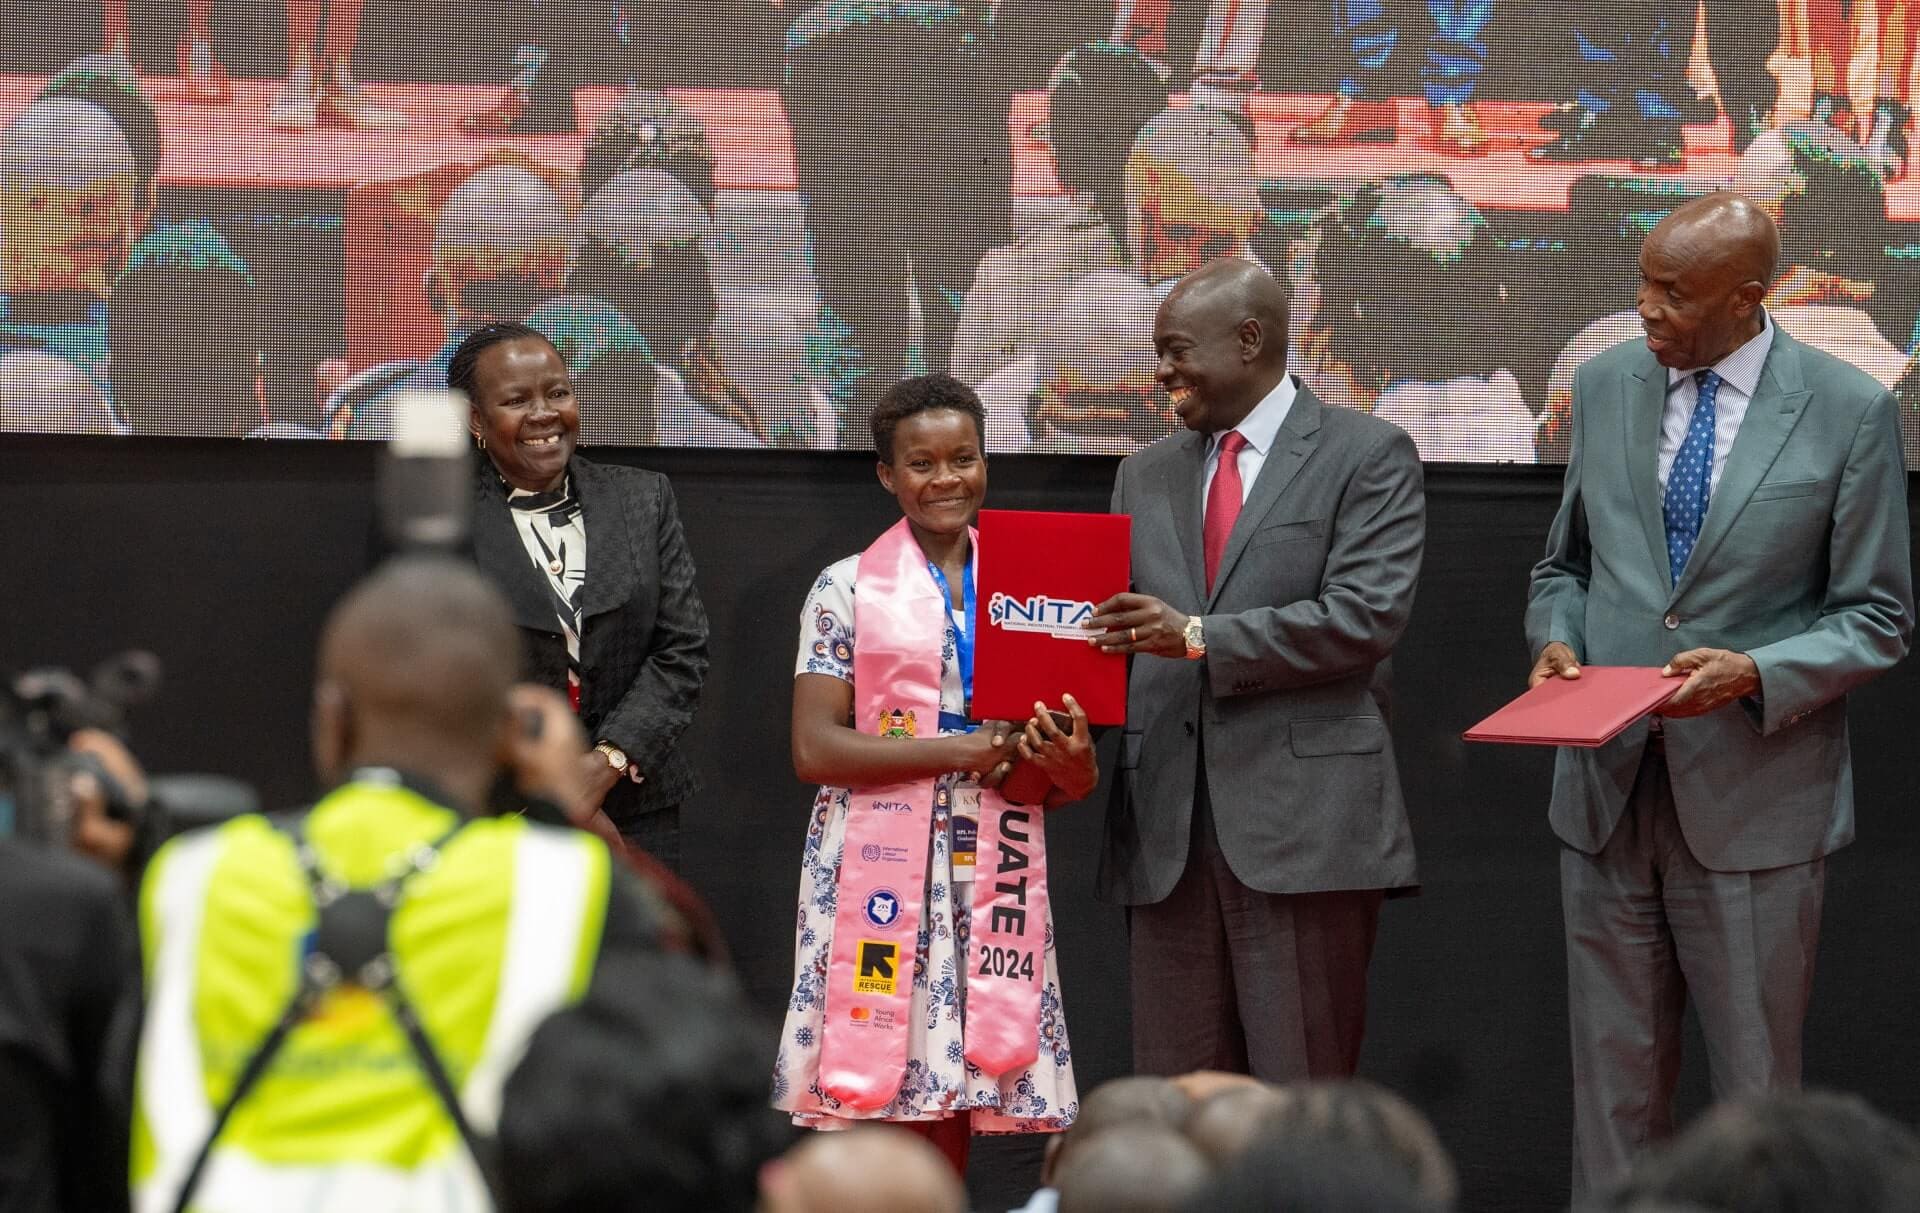 One of the RPL graduates receiving her certificate from the Deputy President of Kenya, Rigathi Gachagua